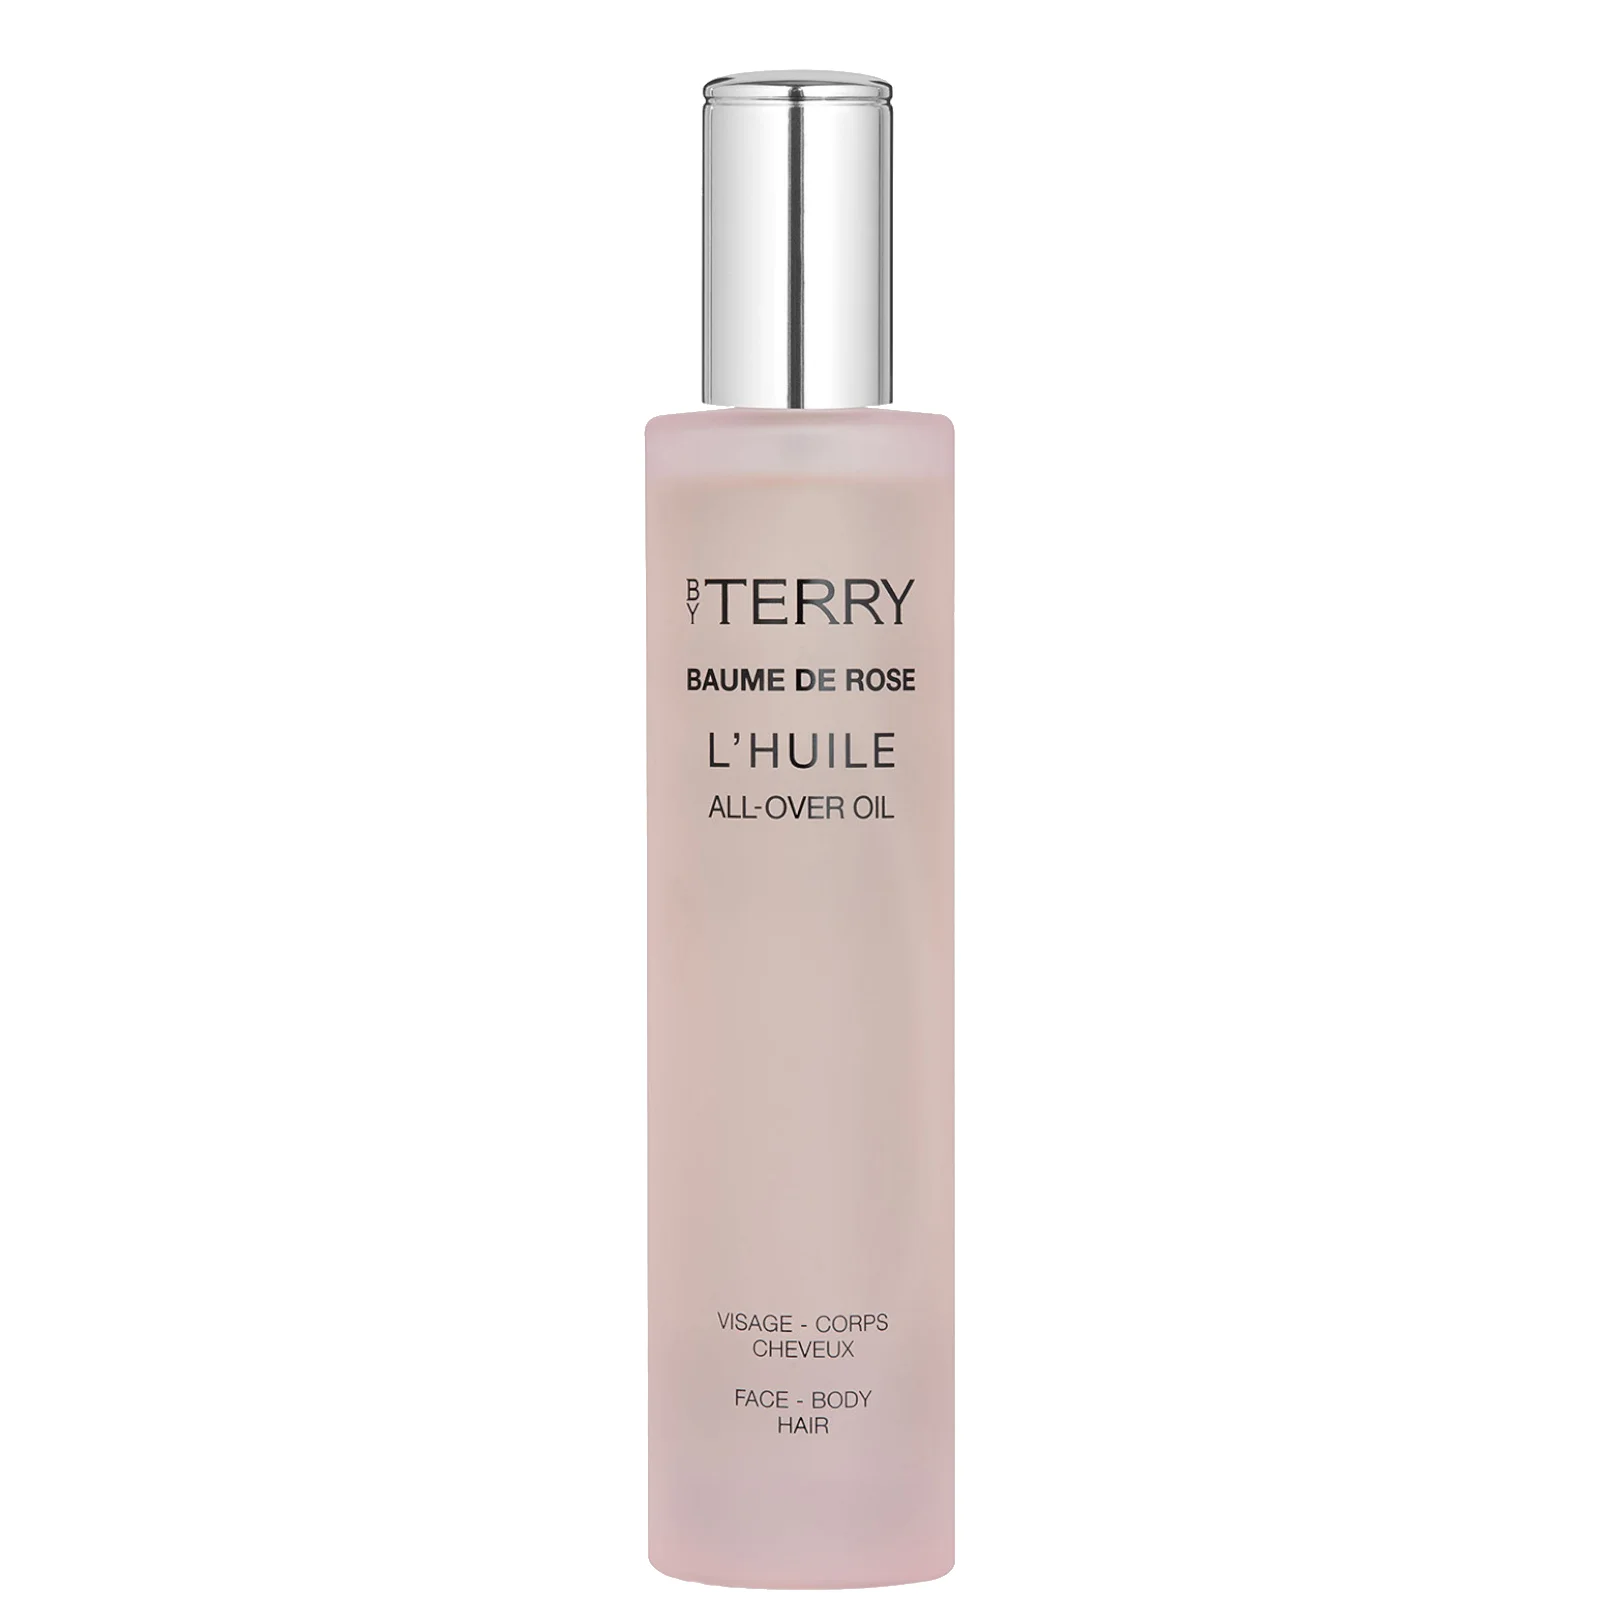 By Terry Baume de Rose All-Over Oil 100ml Image 1